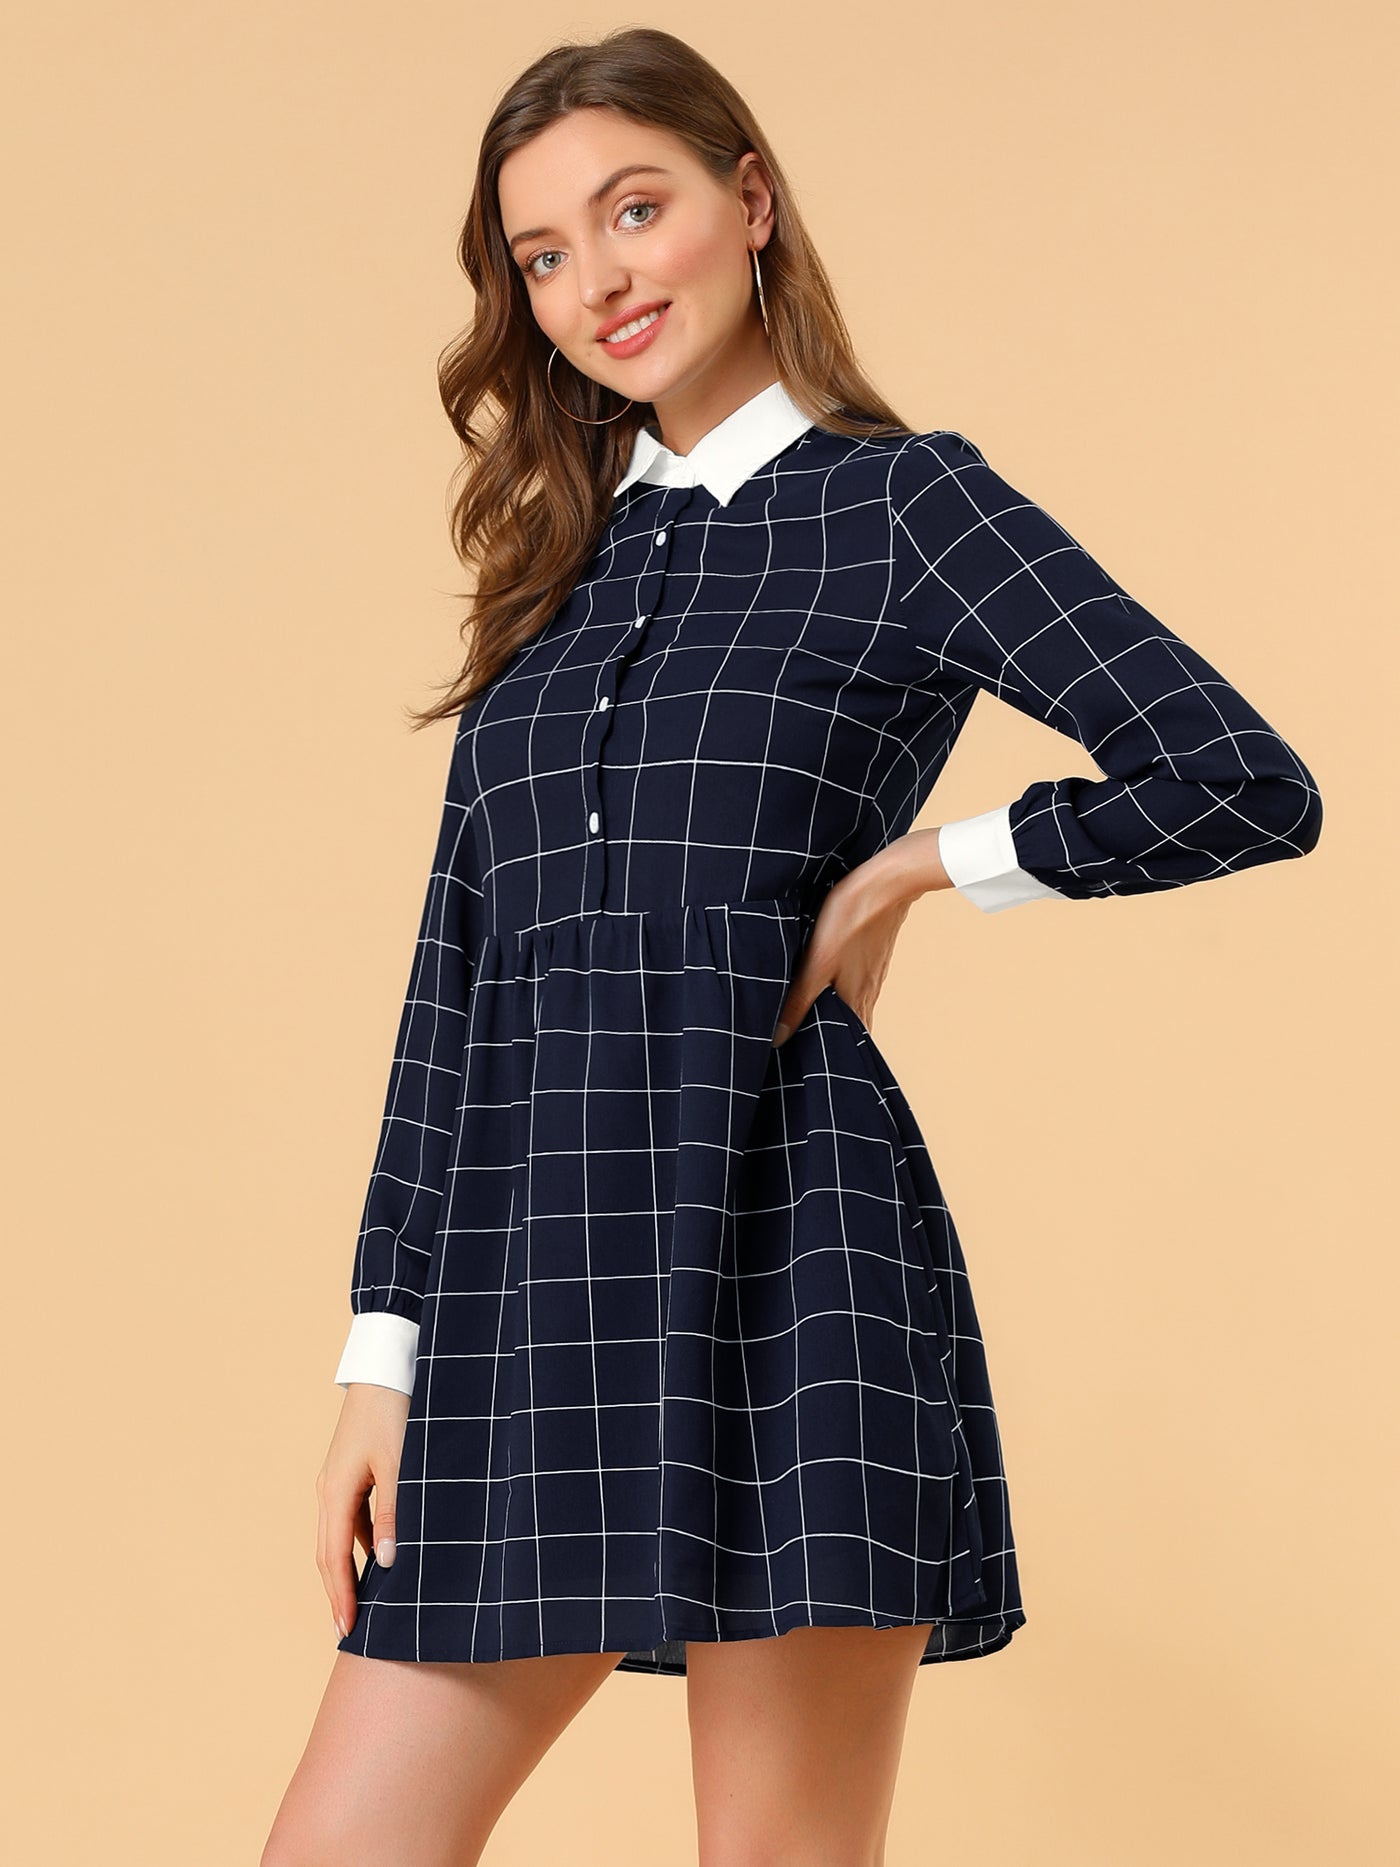 Allegra K Casual Grid Plaid Long Sleeve Contrast Color Collared Shirt Dress